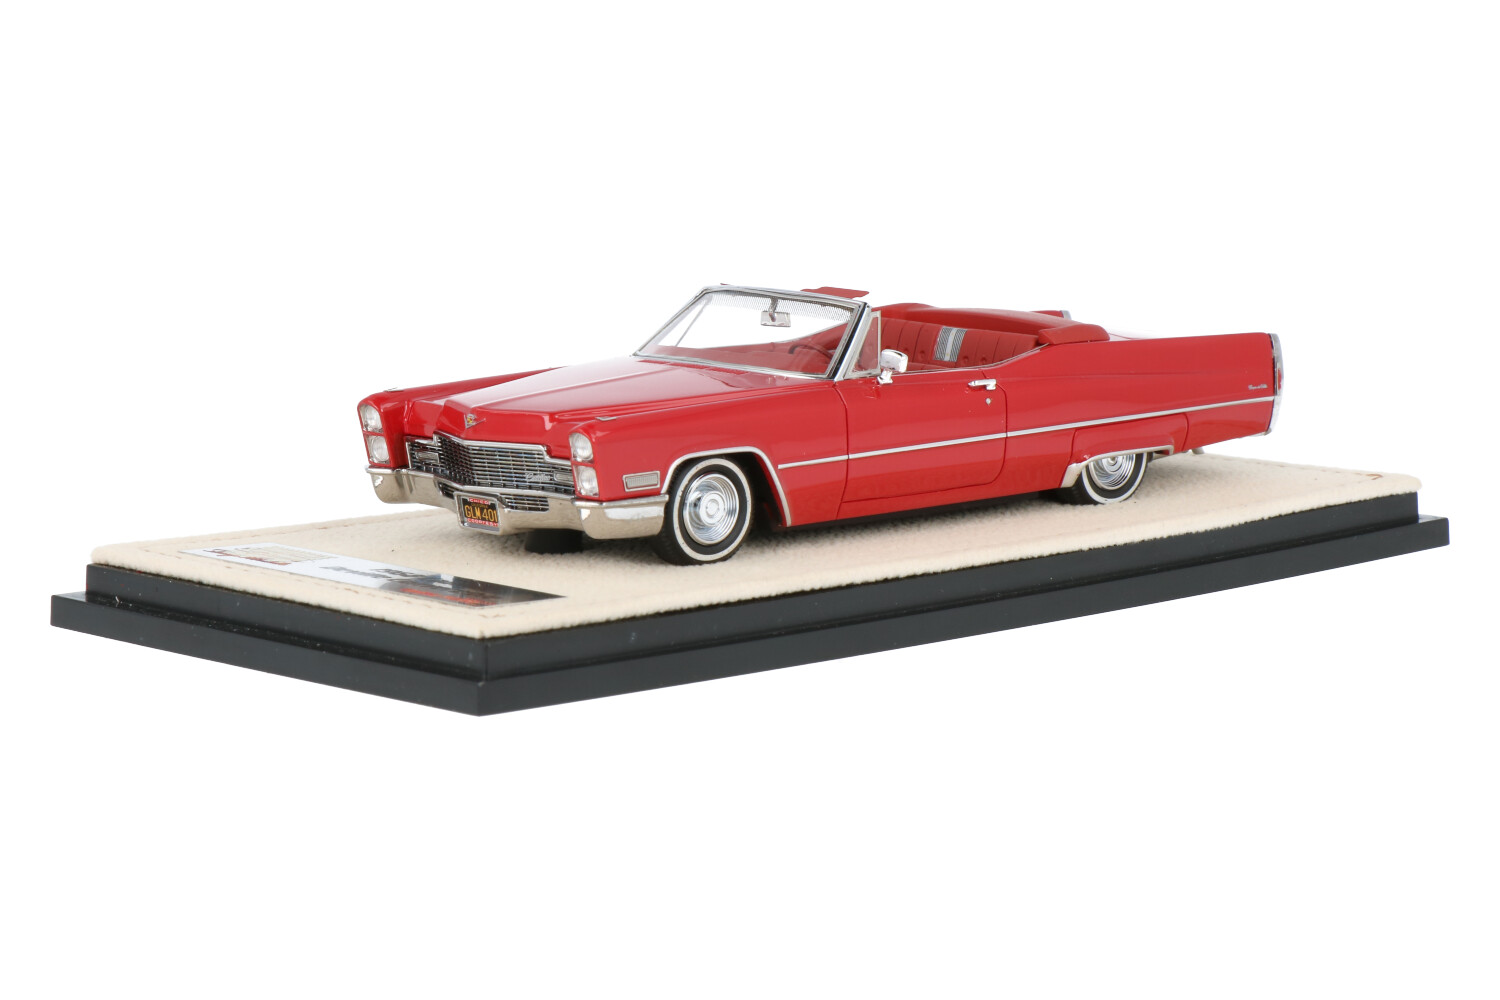 Cadillac-Deville-Convertible-STM68701_1315STM68701Cadillac-Deville-Convertible-STM68701_Houseofmodelcars_.jpg